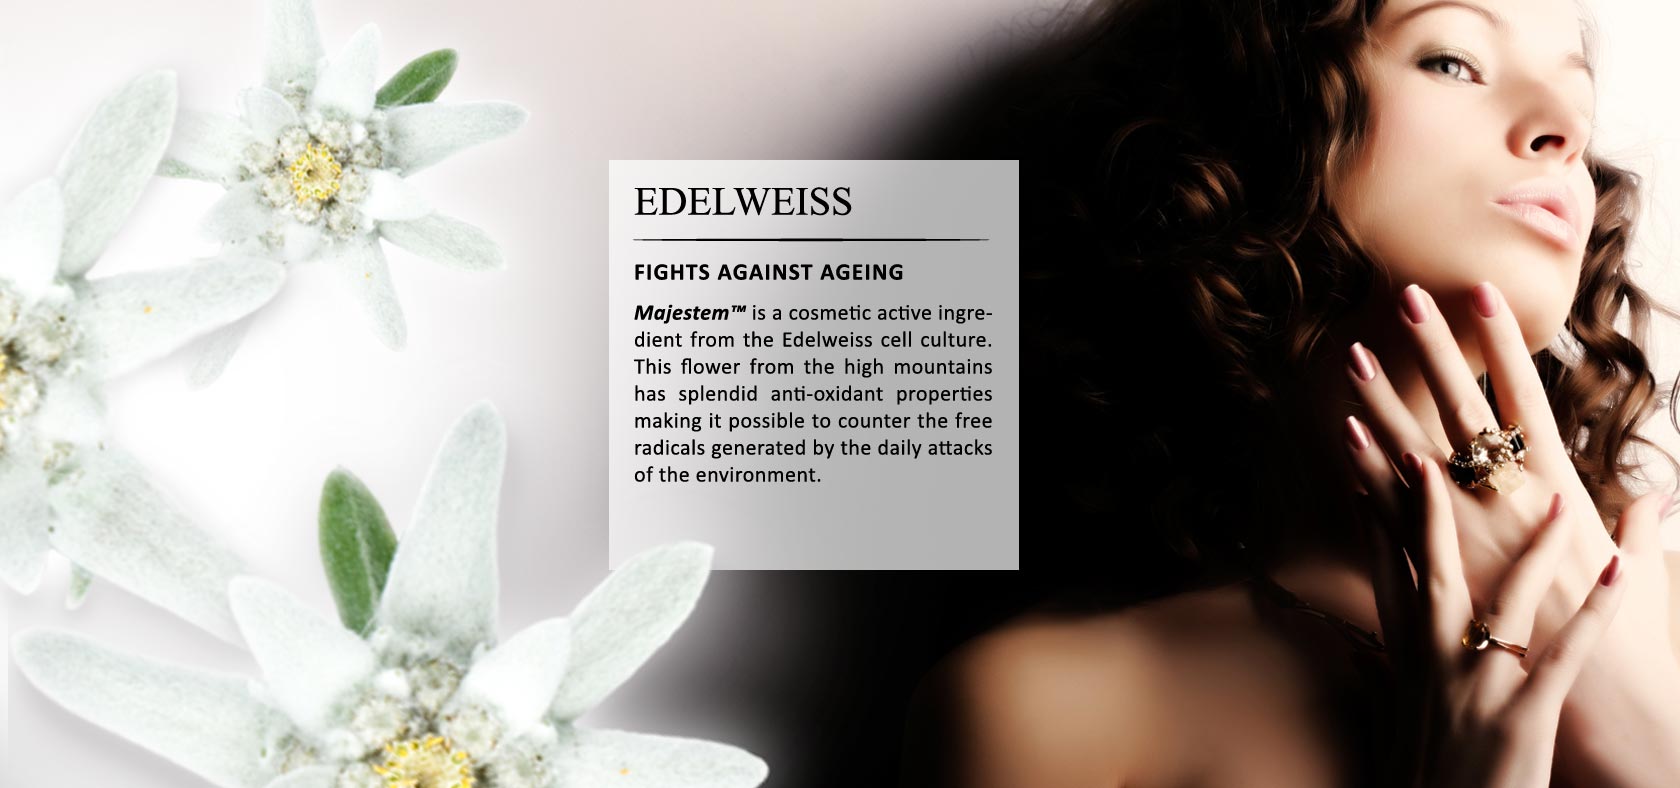 Majestem© is a cosmetic active ingredient from the Edelweiss cell culture. This flower from the high mountains has splendid anti-oxidant properties making it possible to counter the free radicals generated by the daily attacks of the environment.